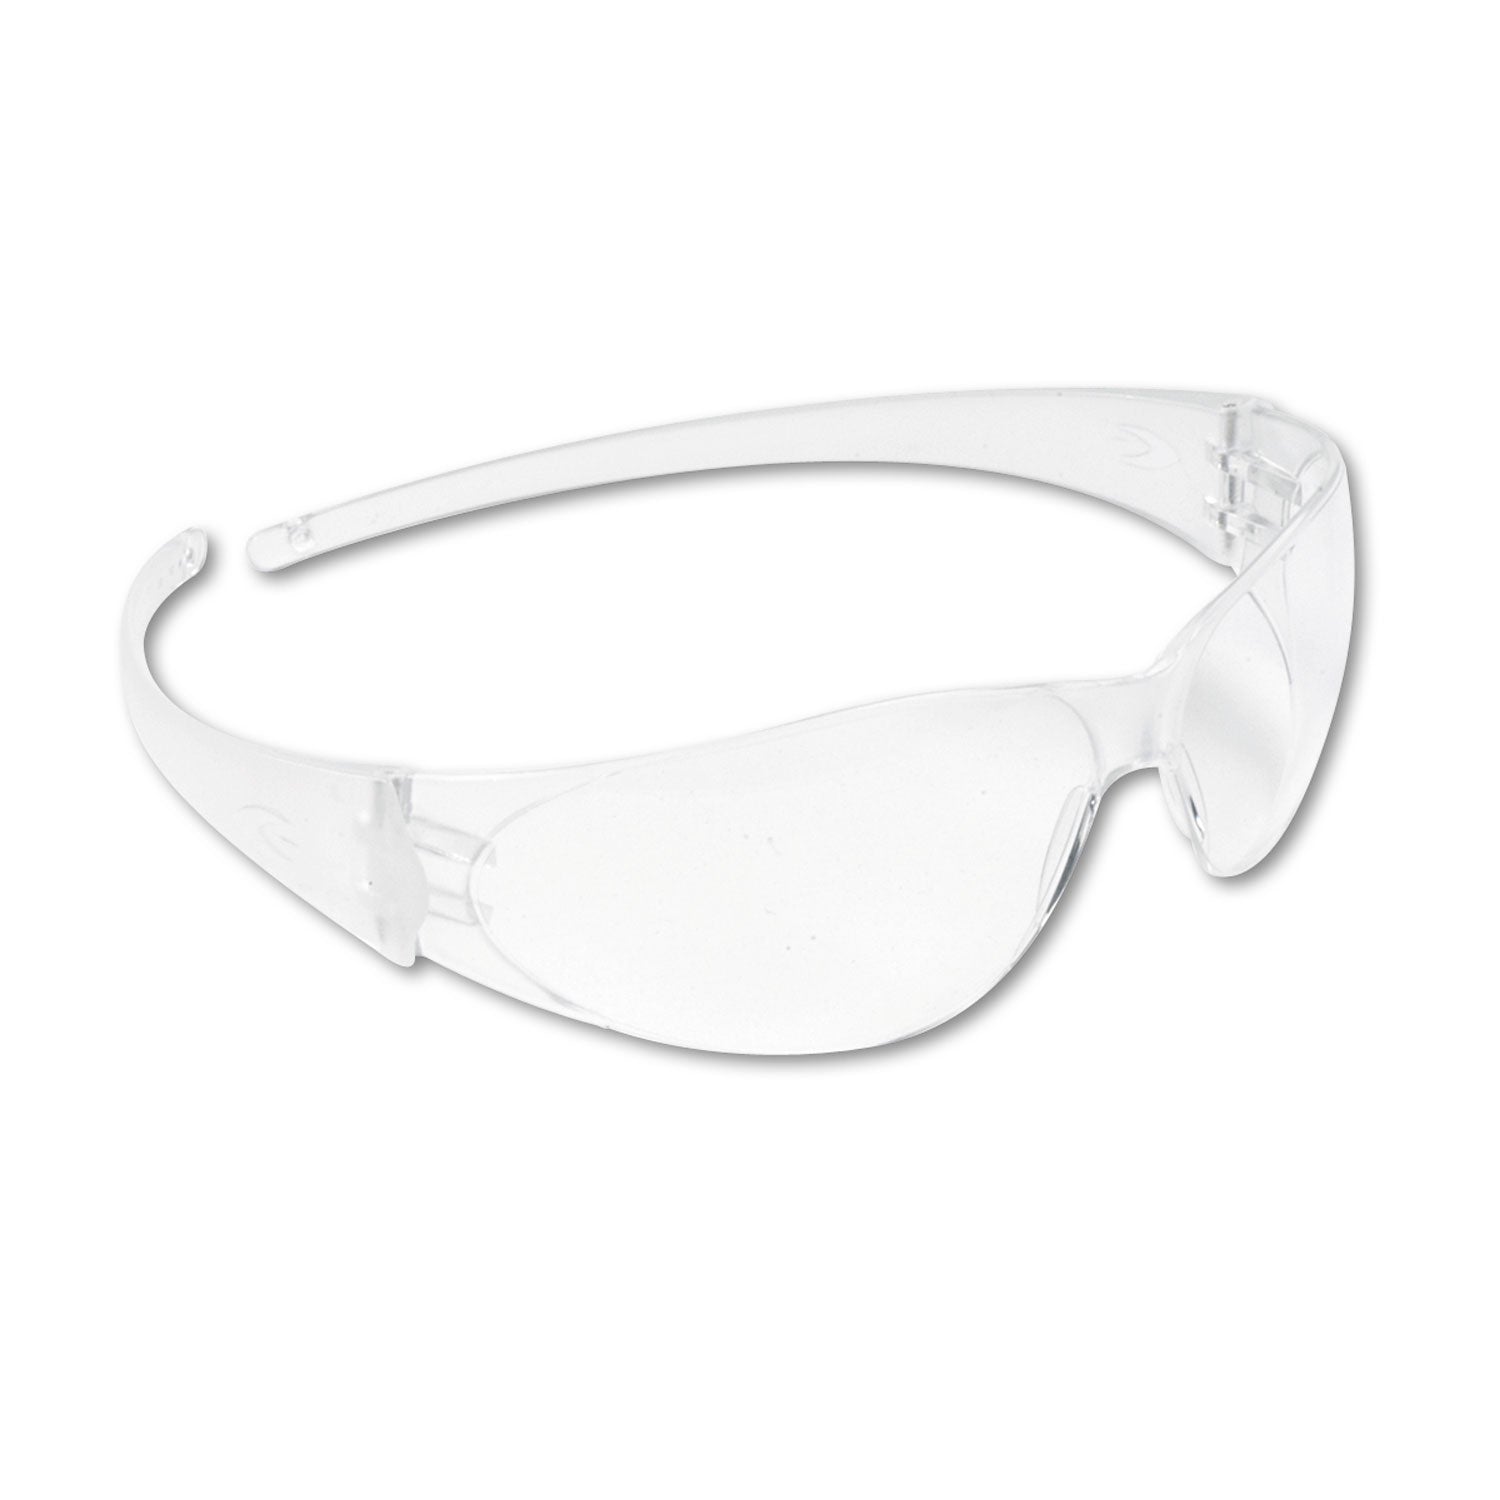 checkmate-wraparound-safety-glasses-clr-polycarbonate-frame-coated-clear-lens-12-box_crwck110bx - 2